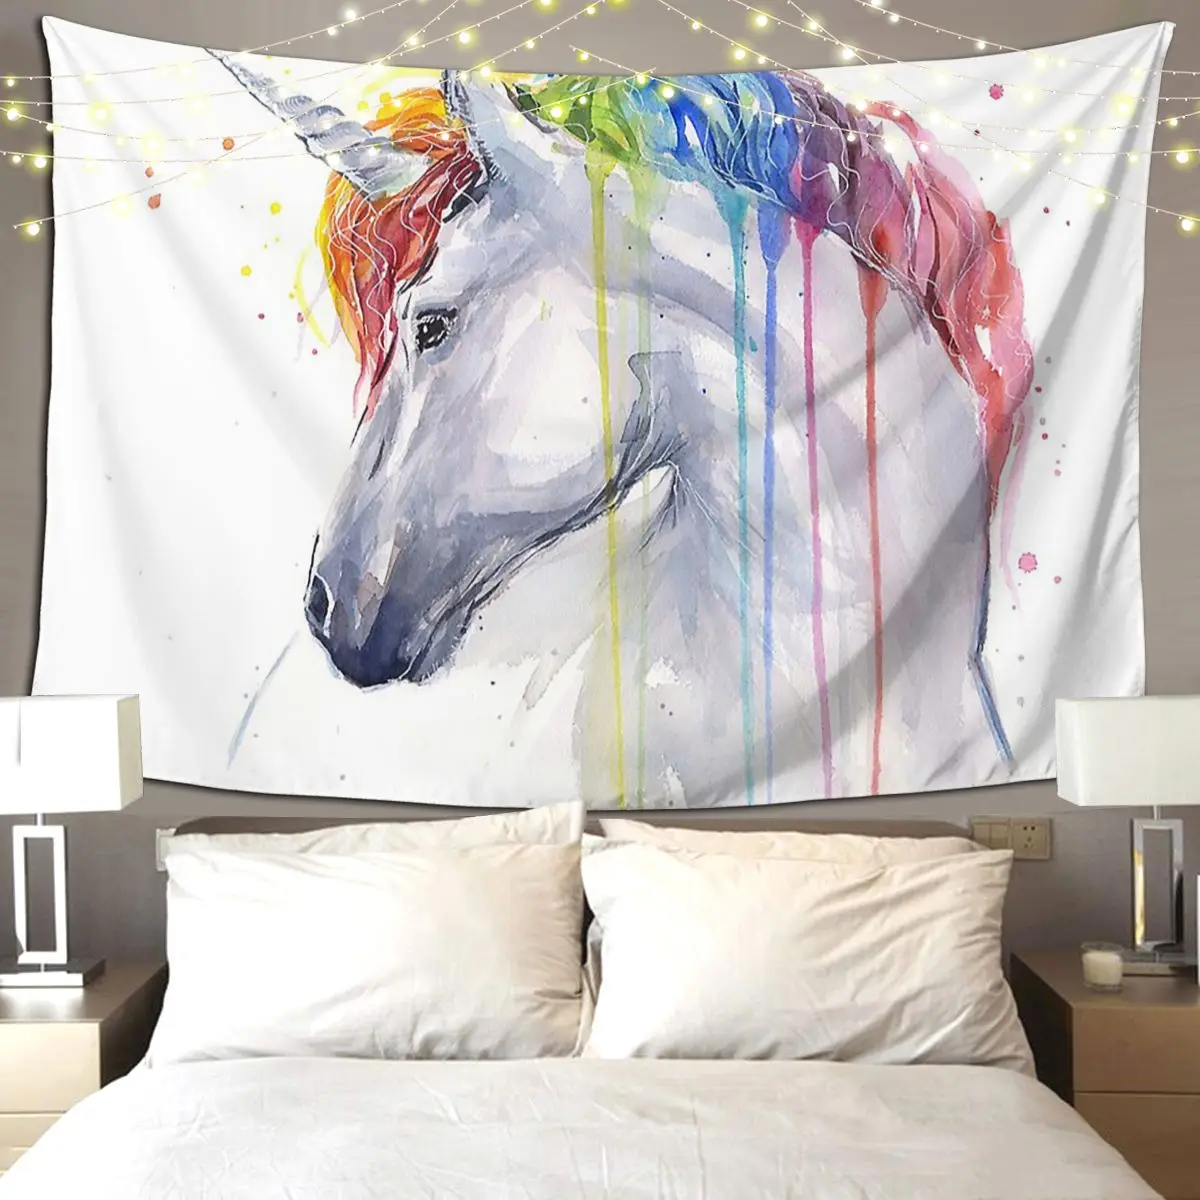 

Rainbow Unicorn Watercolor Tapestry Hippie Wall Hanging Aesthetic Home Decoration Tapestries for Living Room Bedroom Dorm Room